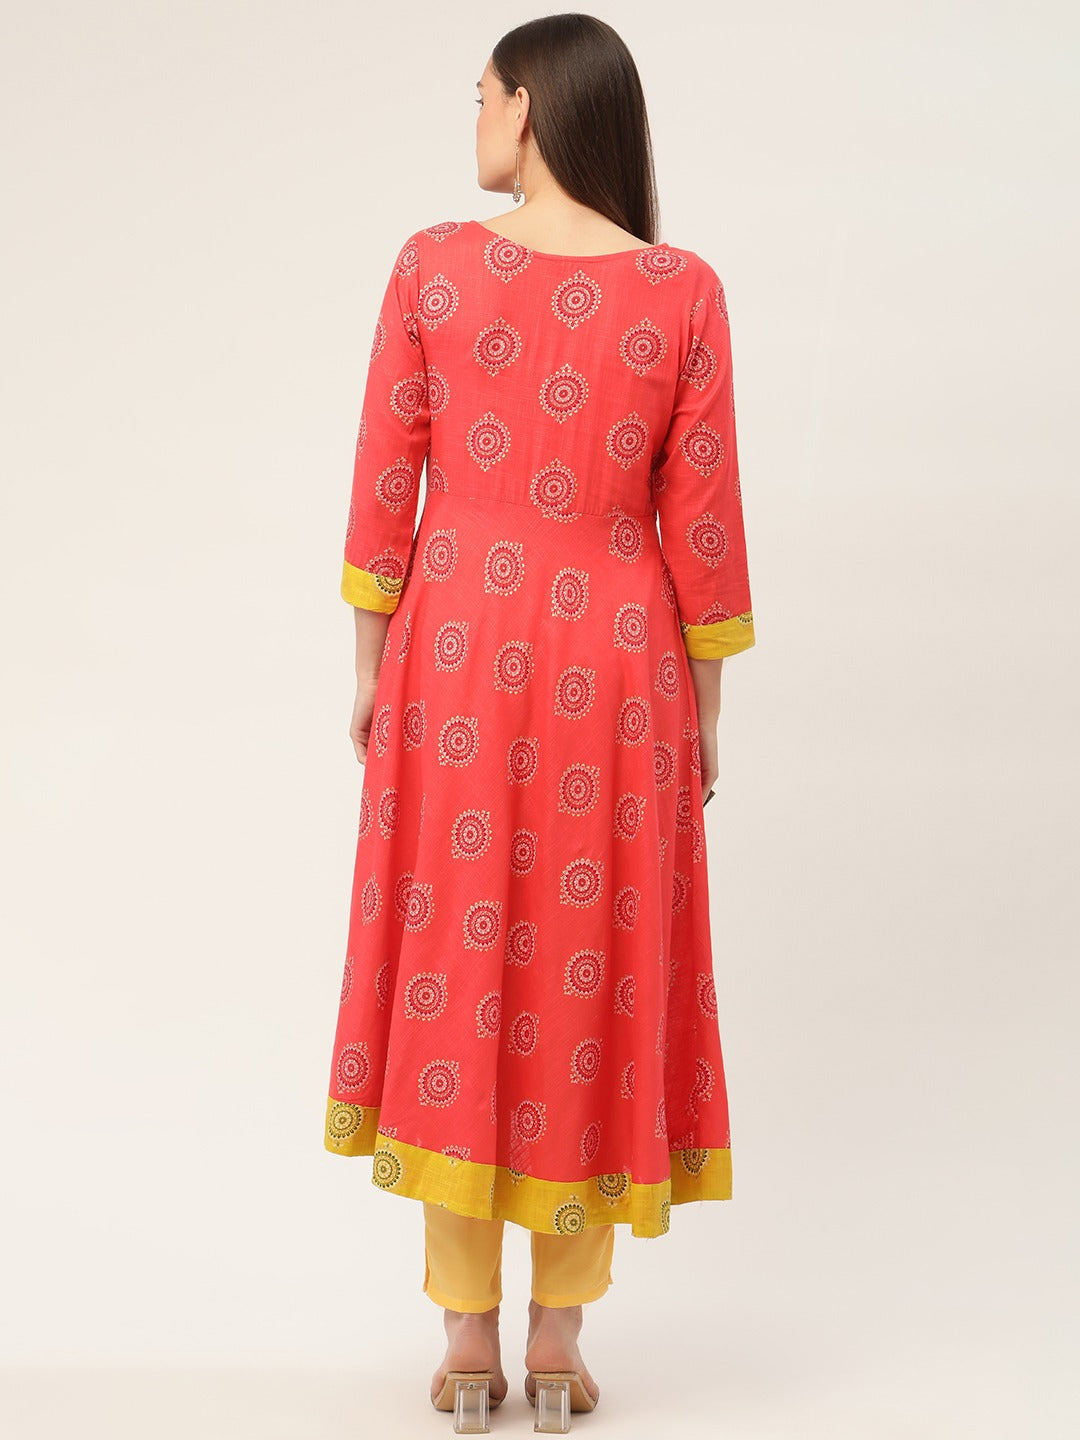 Women's Red and Yellow Cotton Blend Flared Printed kurta ( JOK 1425 Red ) - Jompers